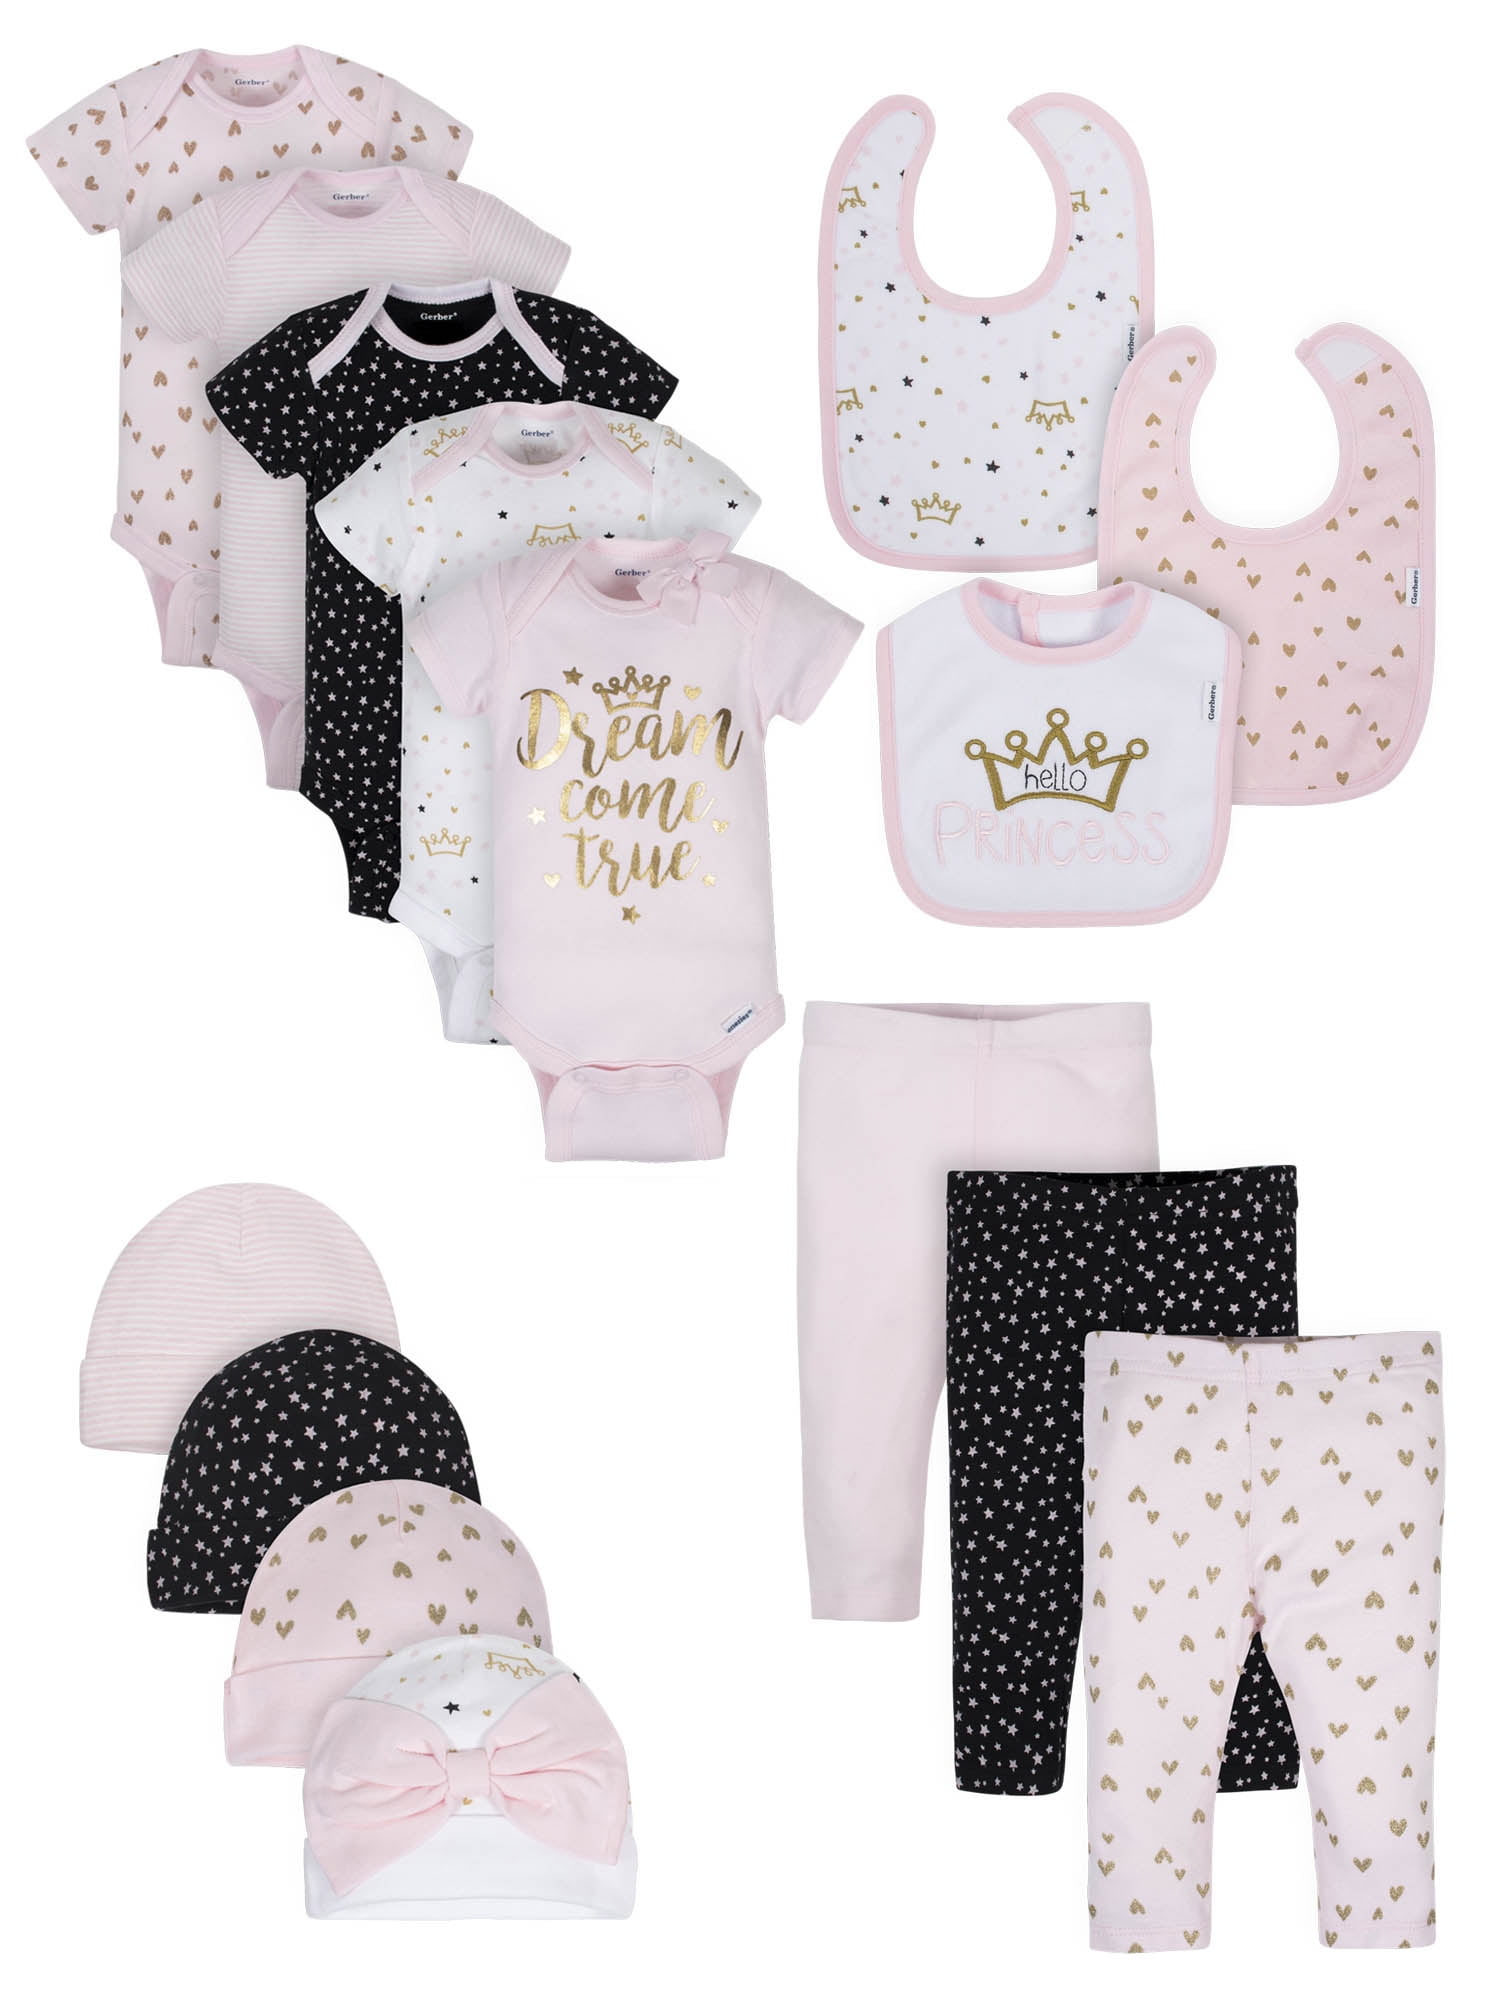 baby shower gifts for girl walmart